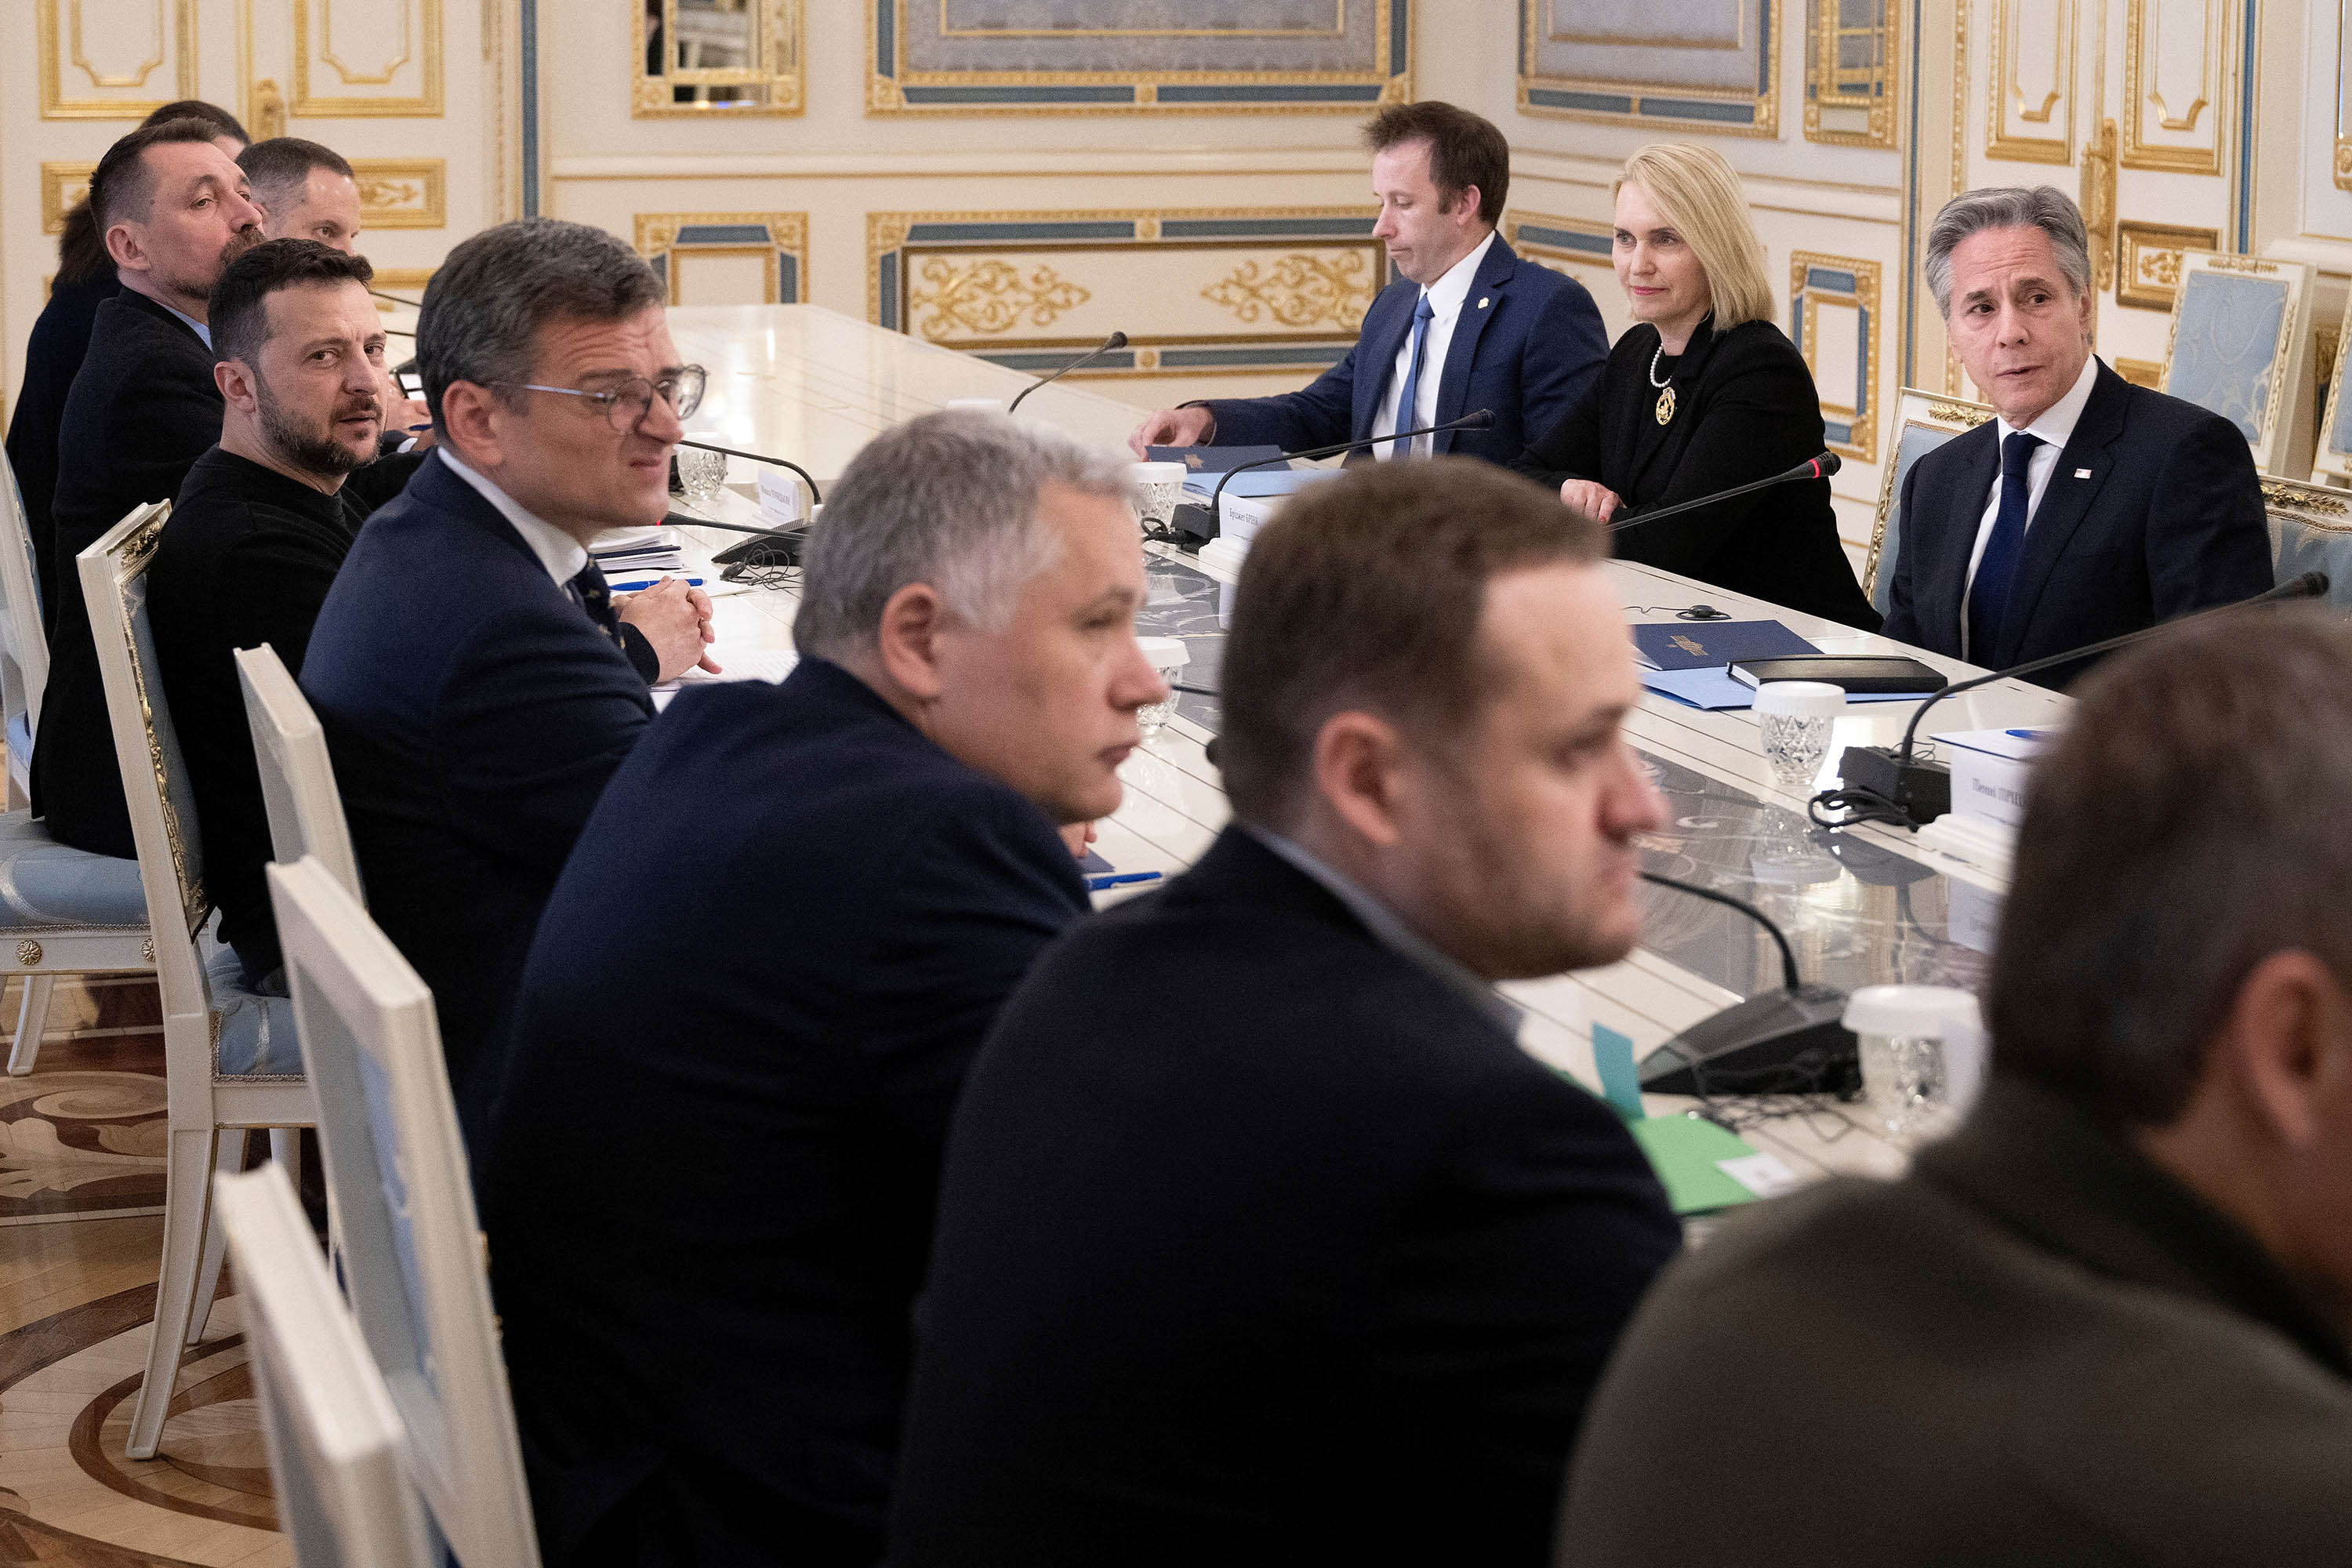 Ukraine's President Volodymyr Zelensky meets with US Secretary of State Antony Blinken and members of their delegations in Kyiv on May 14.  